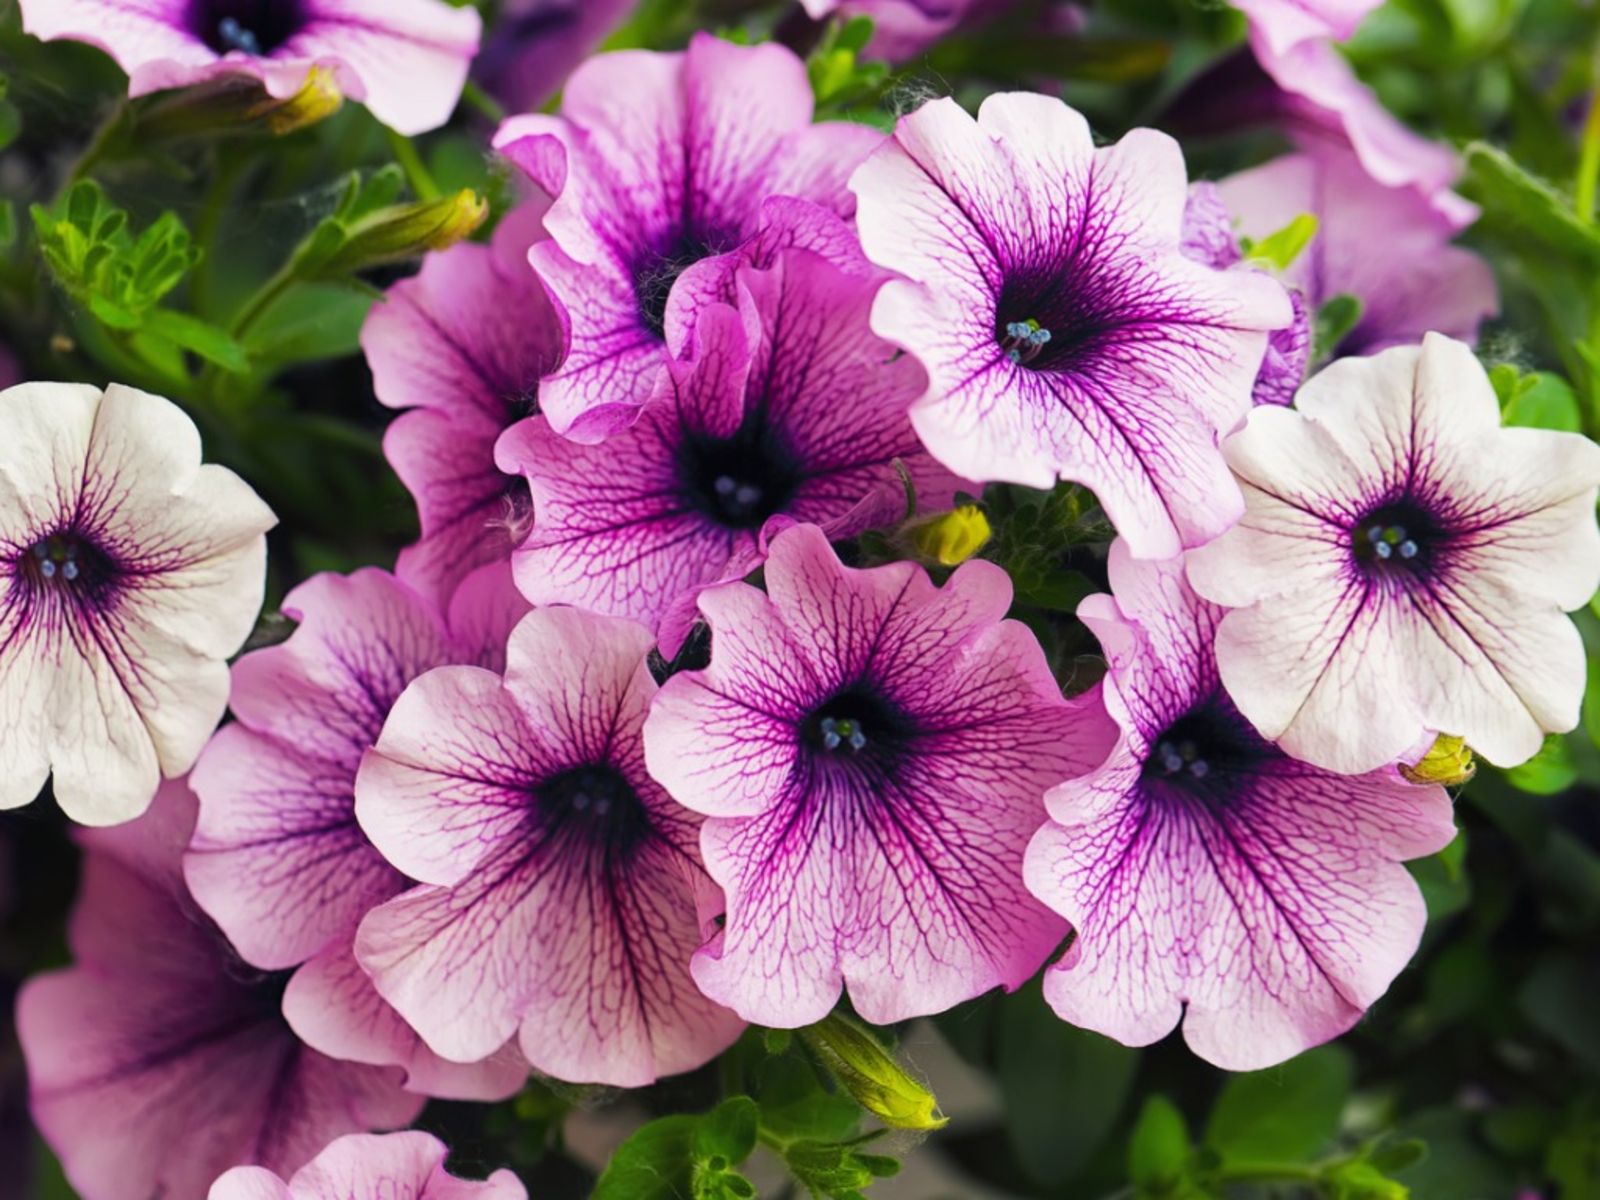 Reasons for White Spots on Petunia